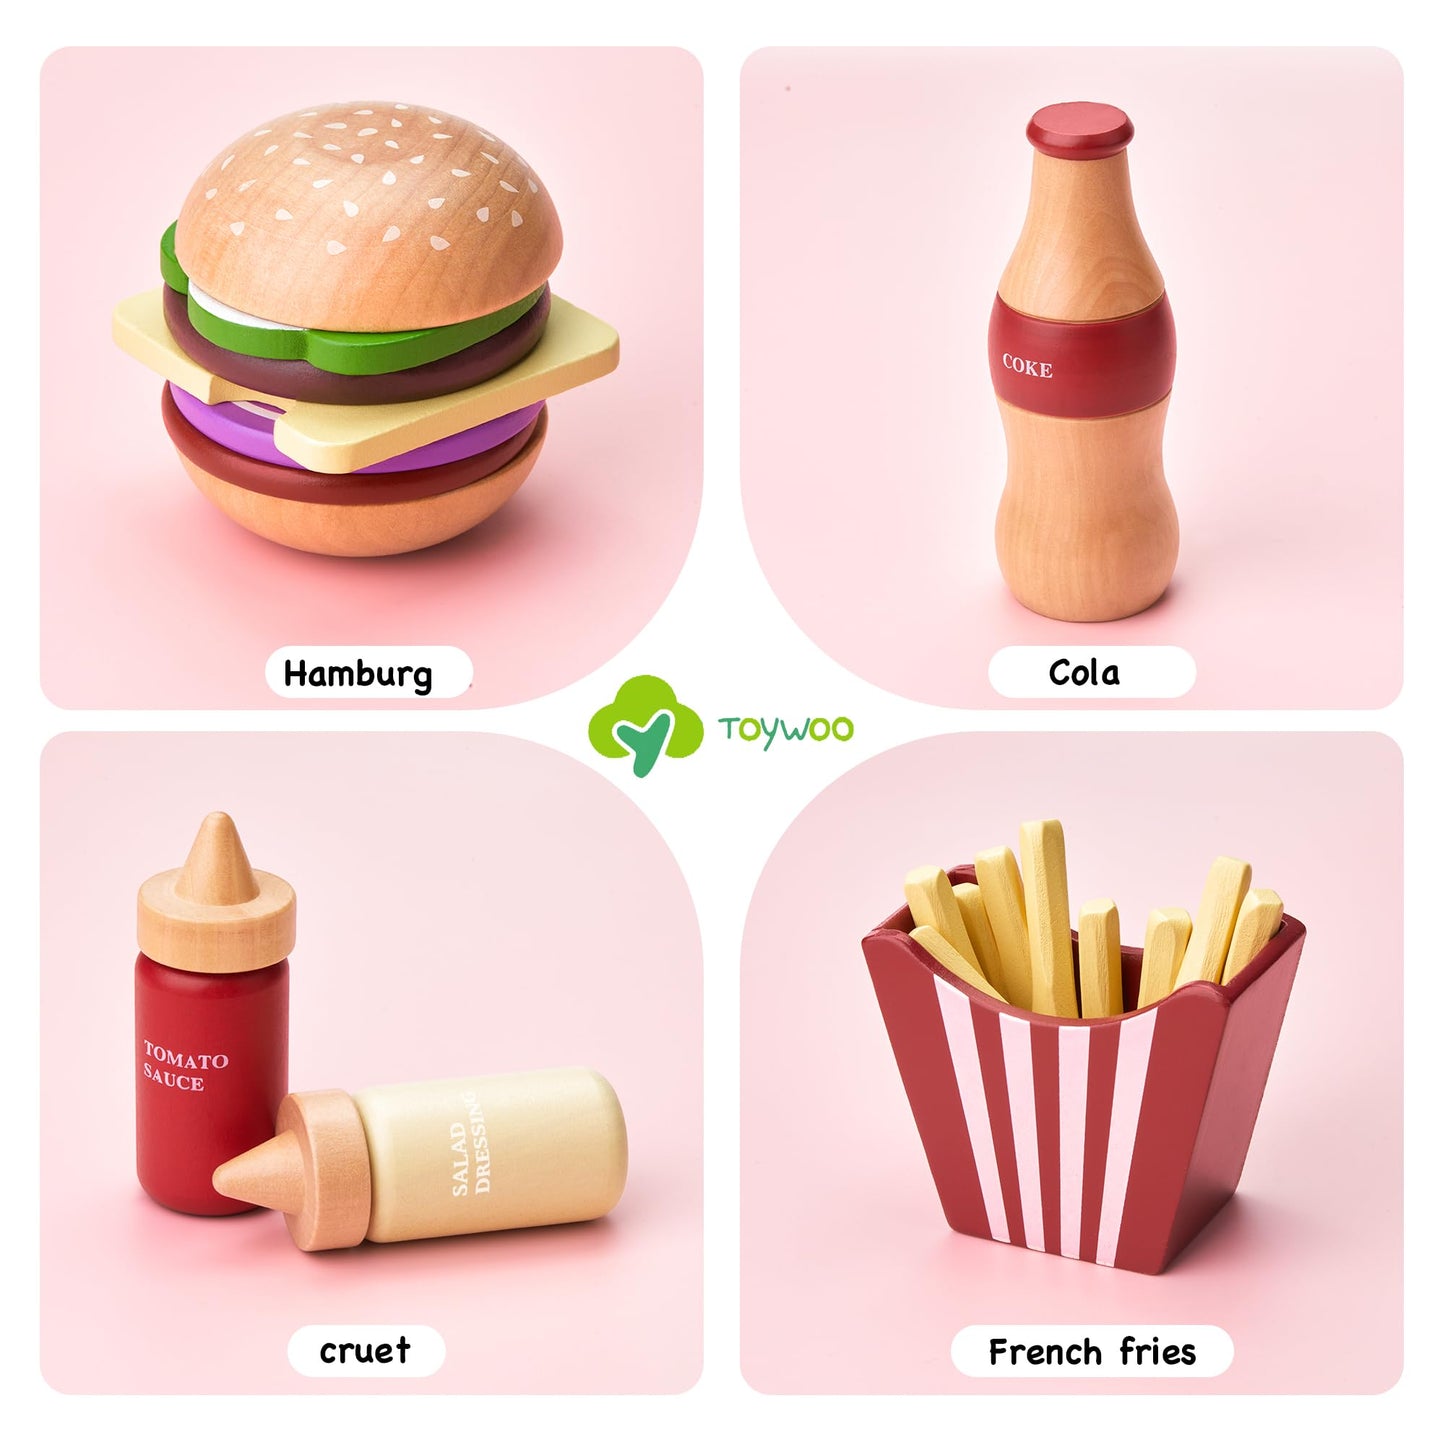 Wooden Play Food for Kids Pretend Hamburger Set Fast Food Toy Play Kitchen Accessories for Toddlers Toy Food Gift for Boys Girls Educational Toys